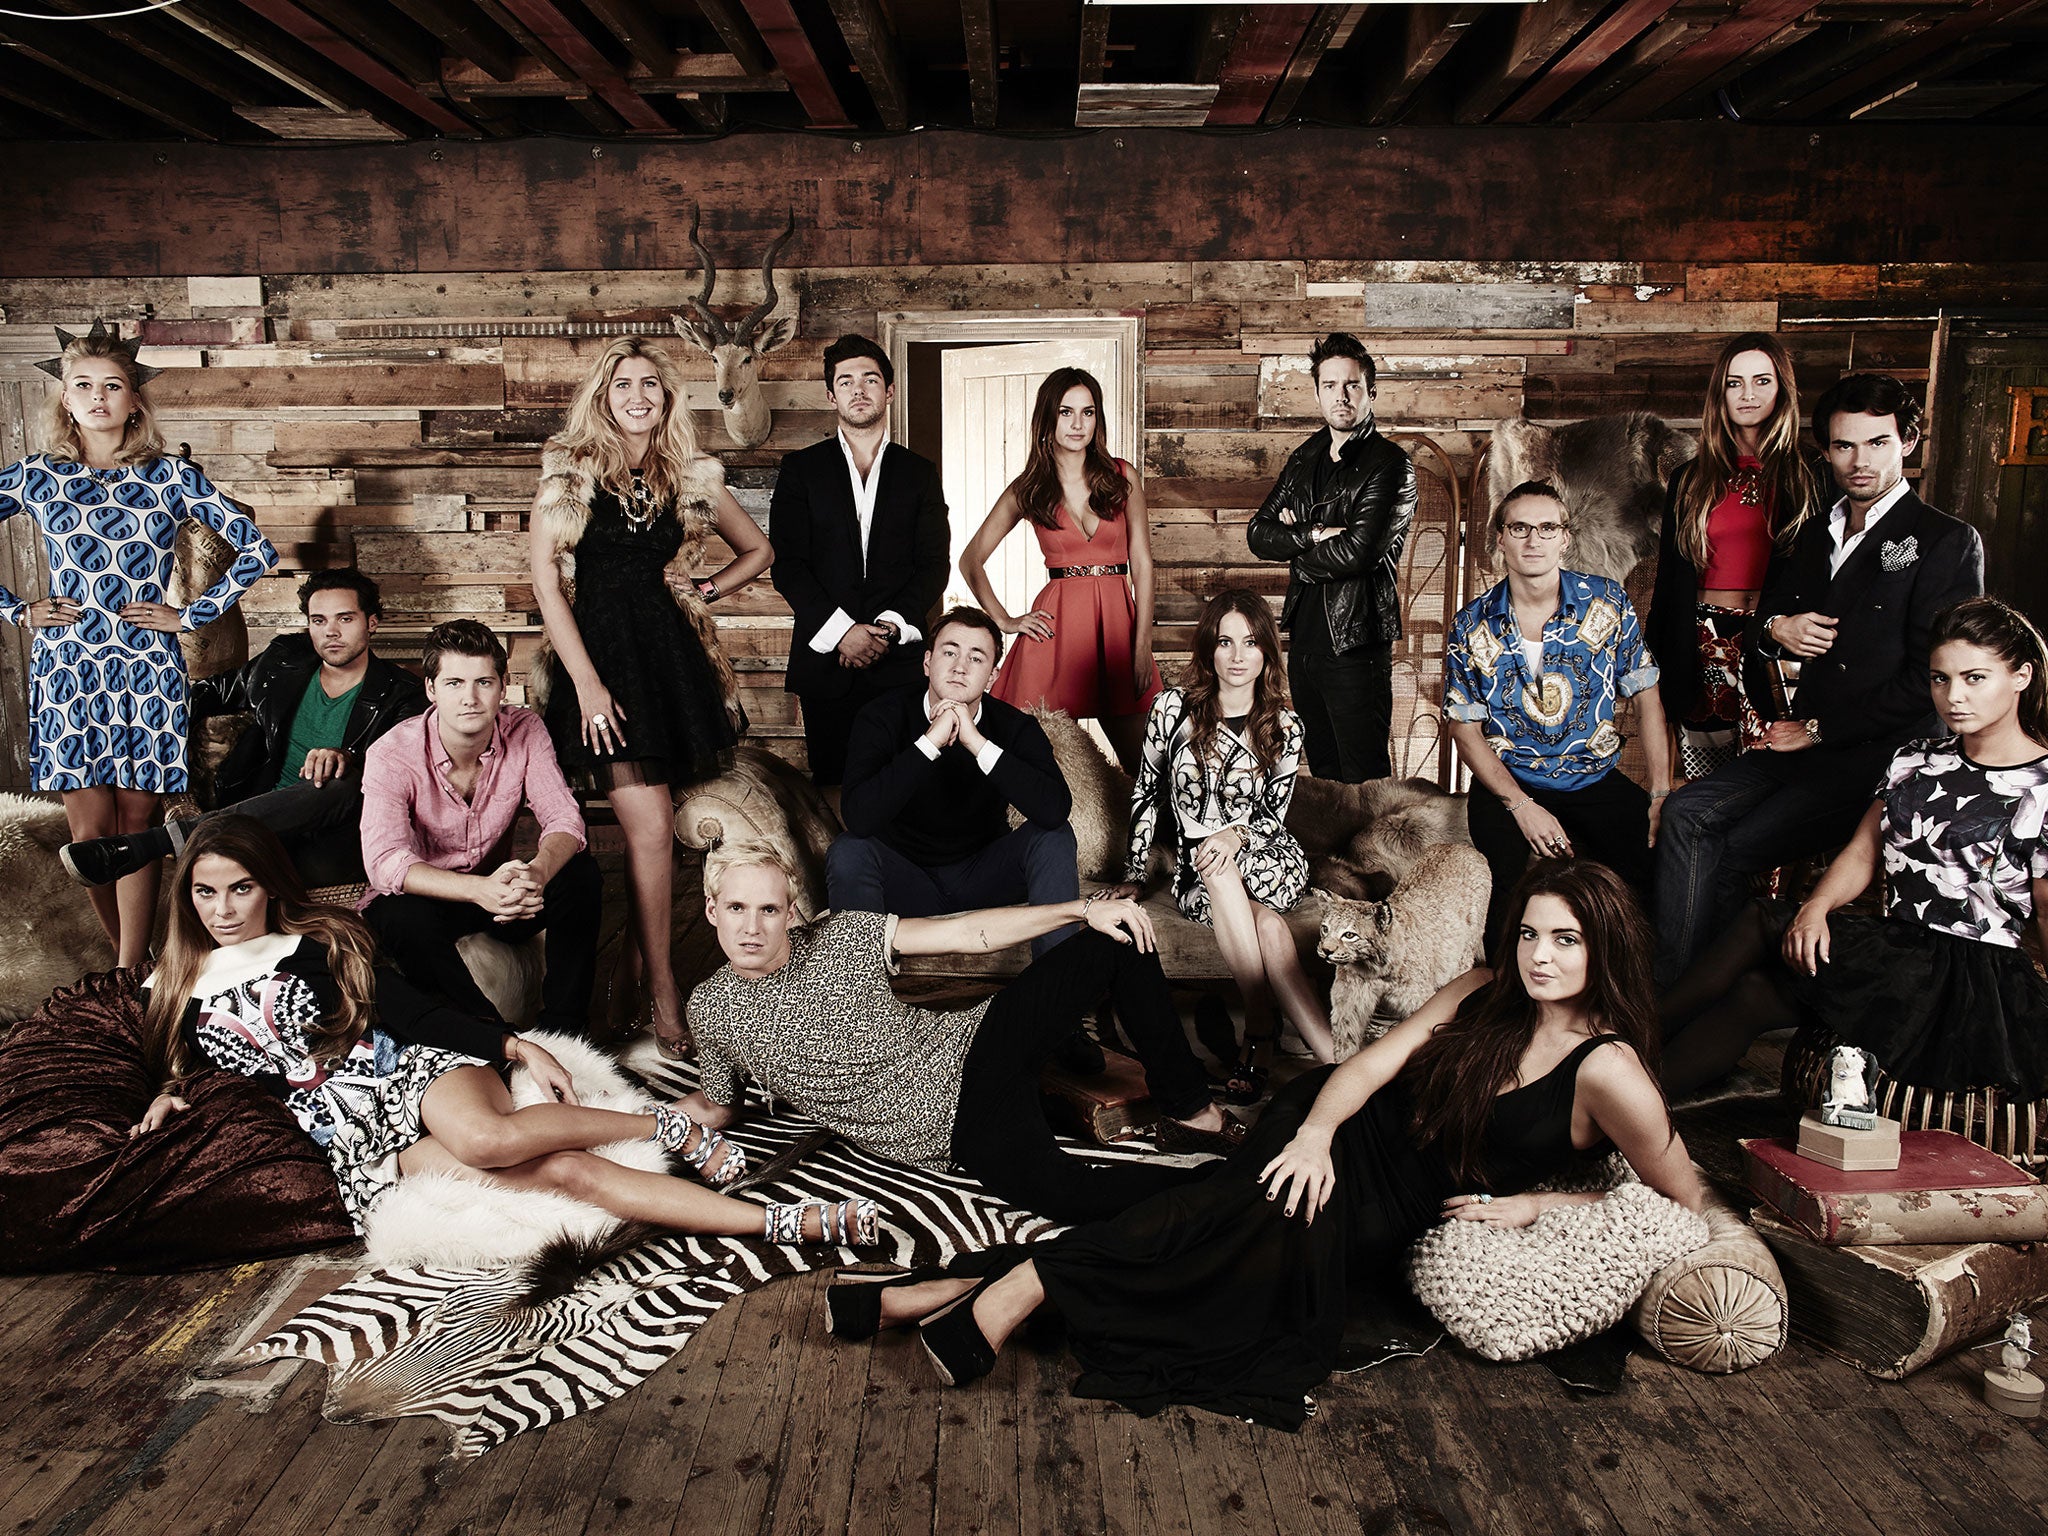 Look who's back, back again: The Made in Chelsea season 7 crew